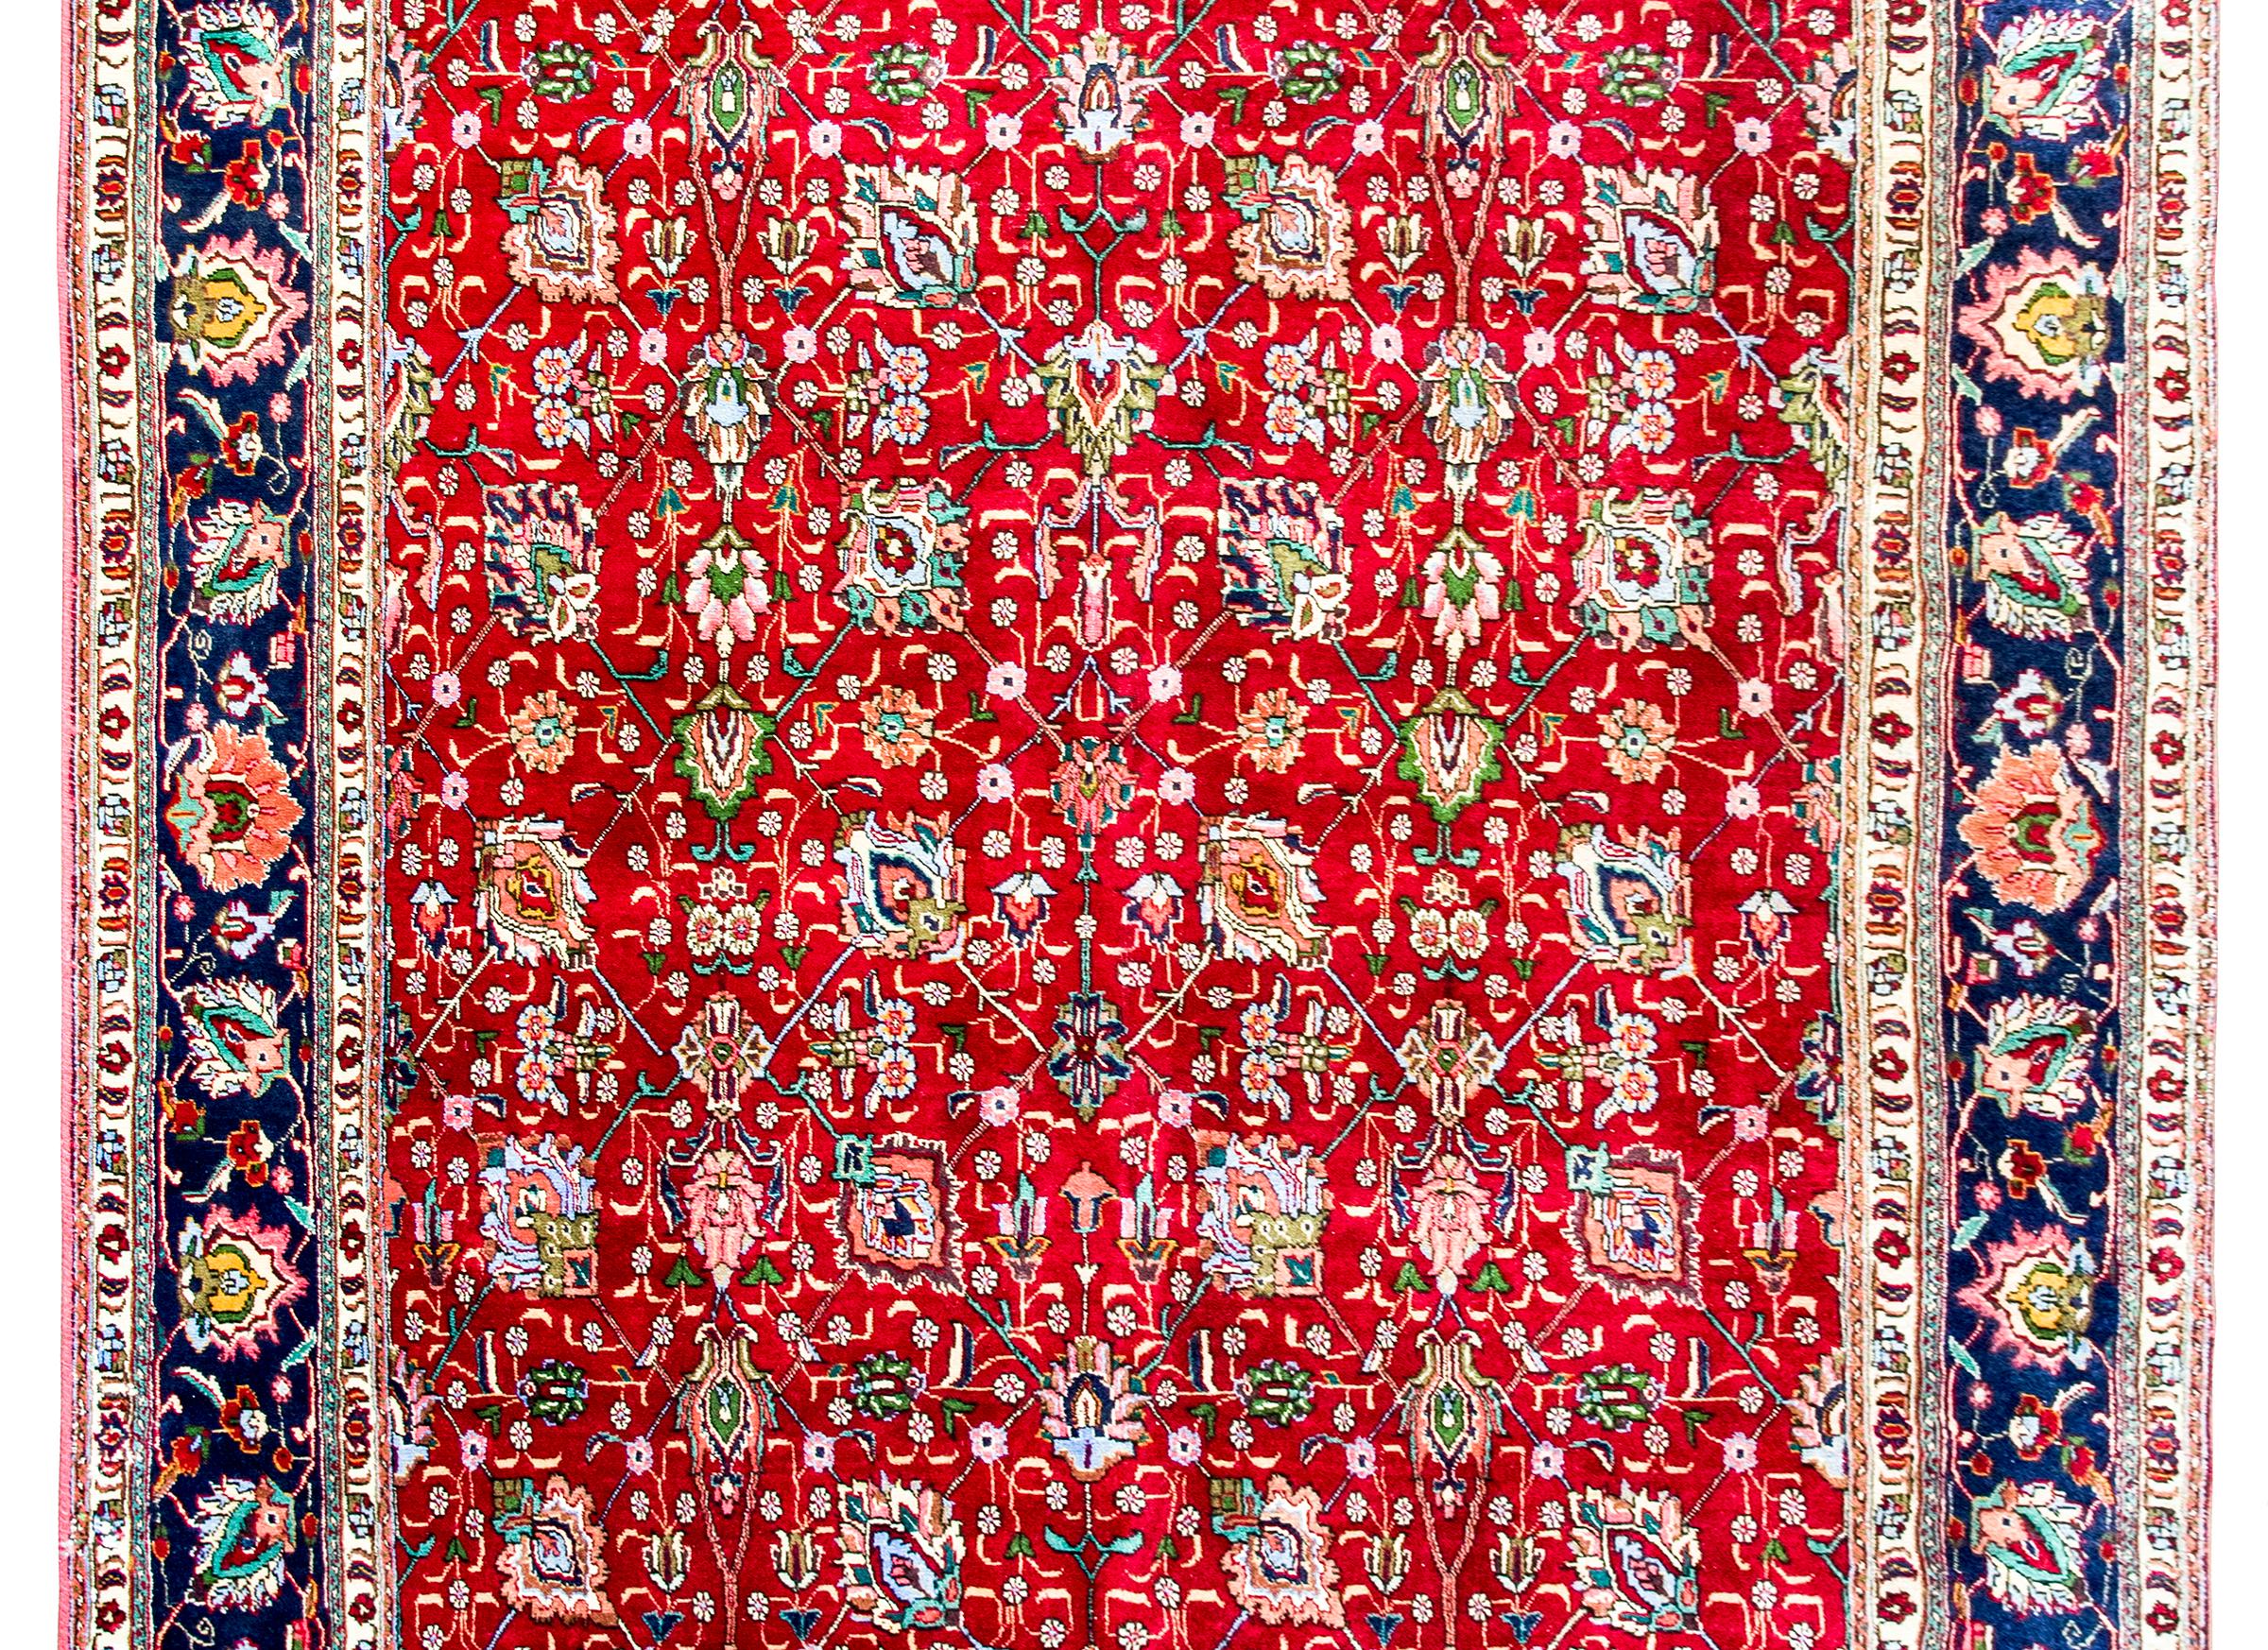 A wonderful mid-20th century Persian Tabriz rug with a large-scale repeated floral pattern woven in myriad colors including pink, green, orange, and light and dark indigo, and all set against a crimson background.  The border is beautiful with a